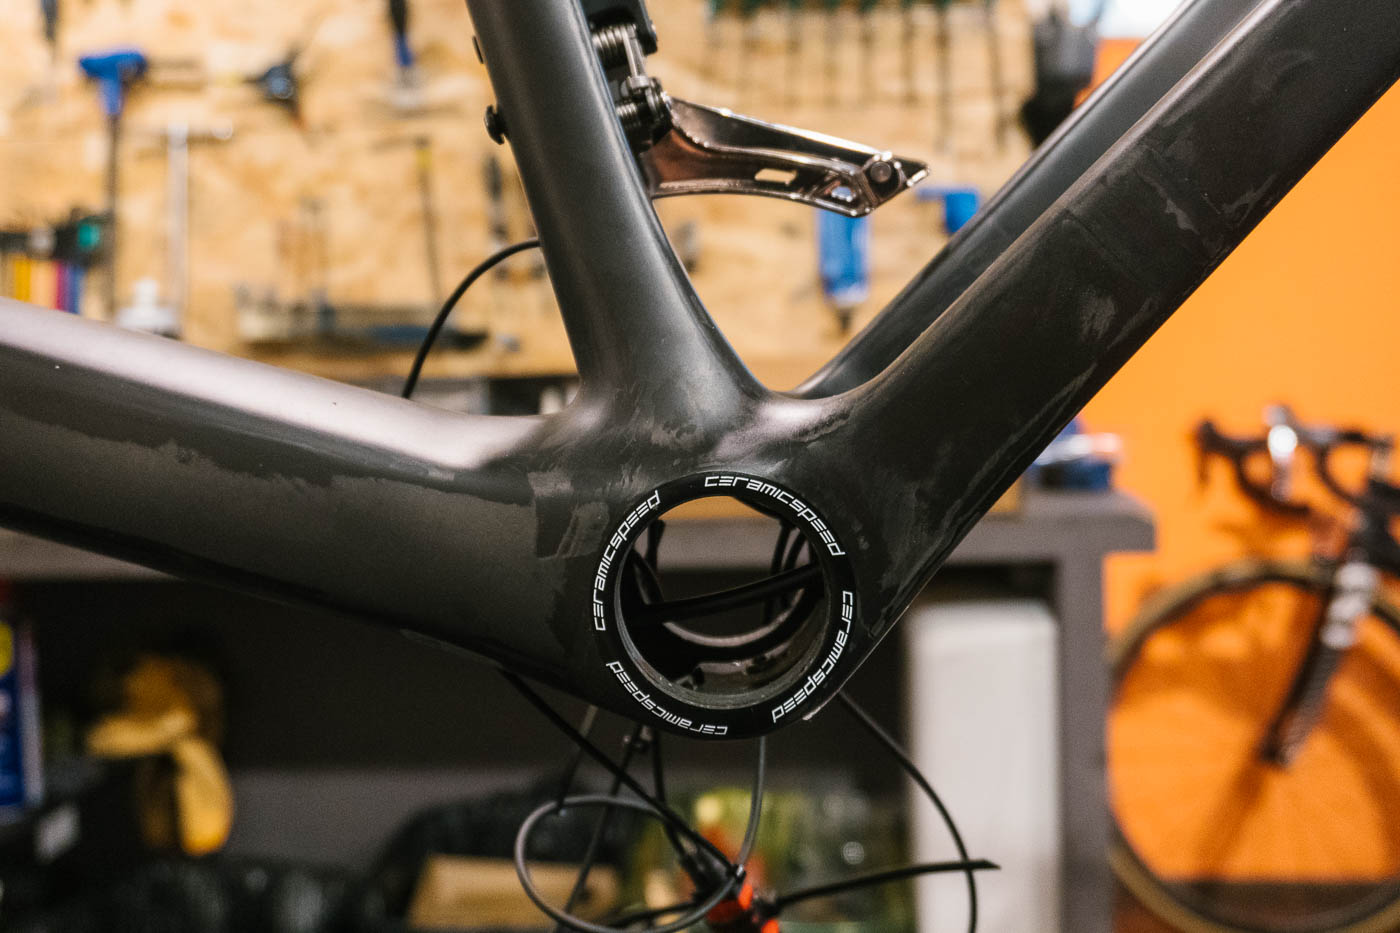 Give your bike the treatment it deserves in our workshop